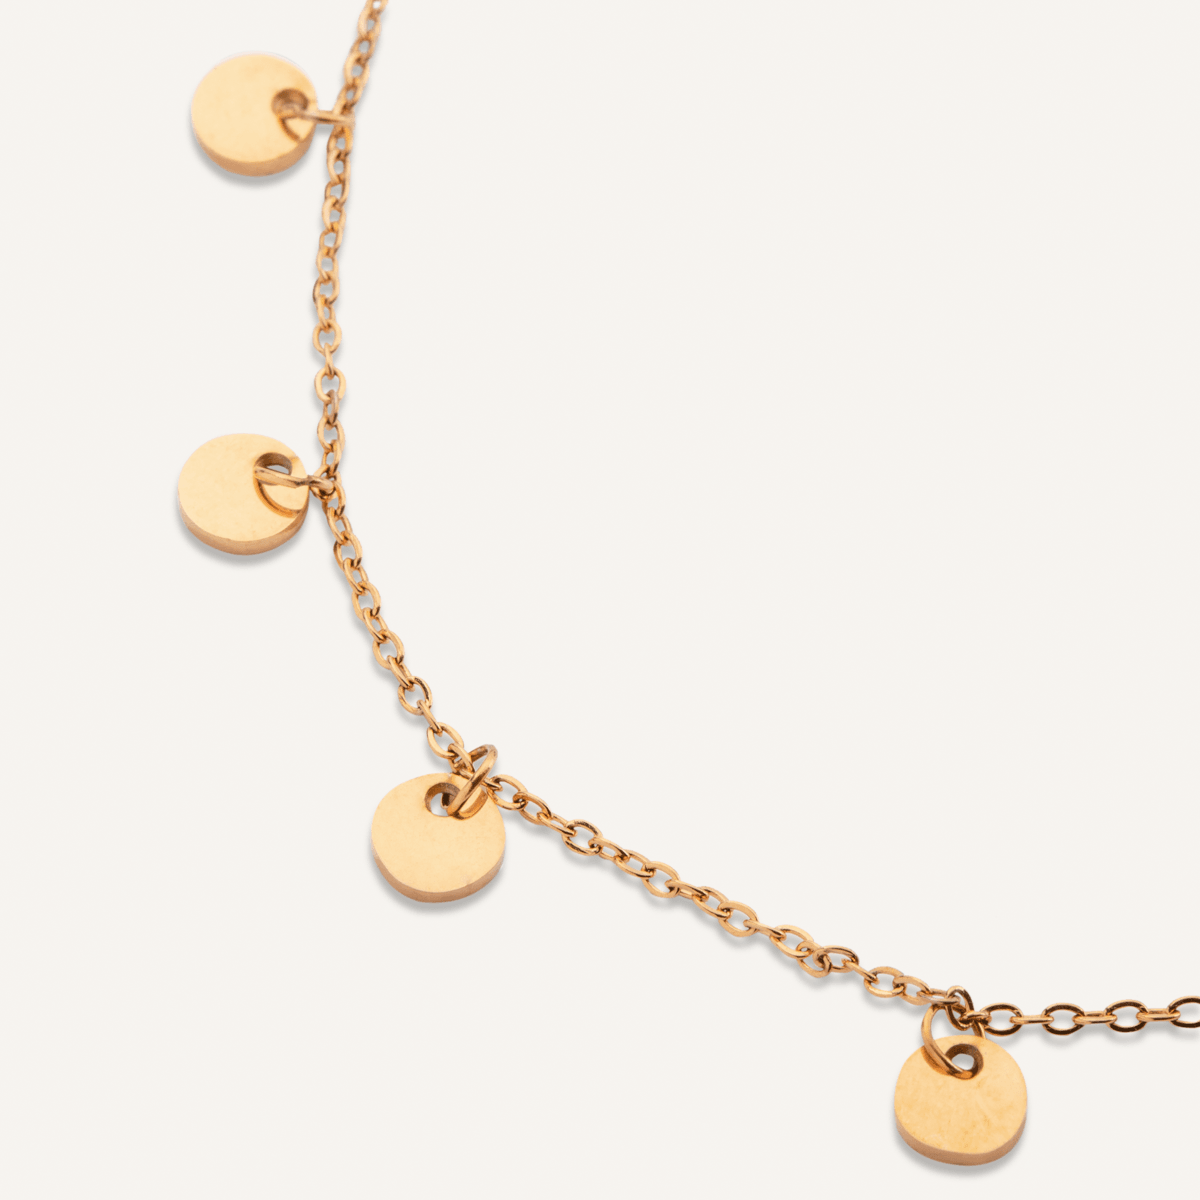 Detailed view of Keira Gold Discs Short Necklace